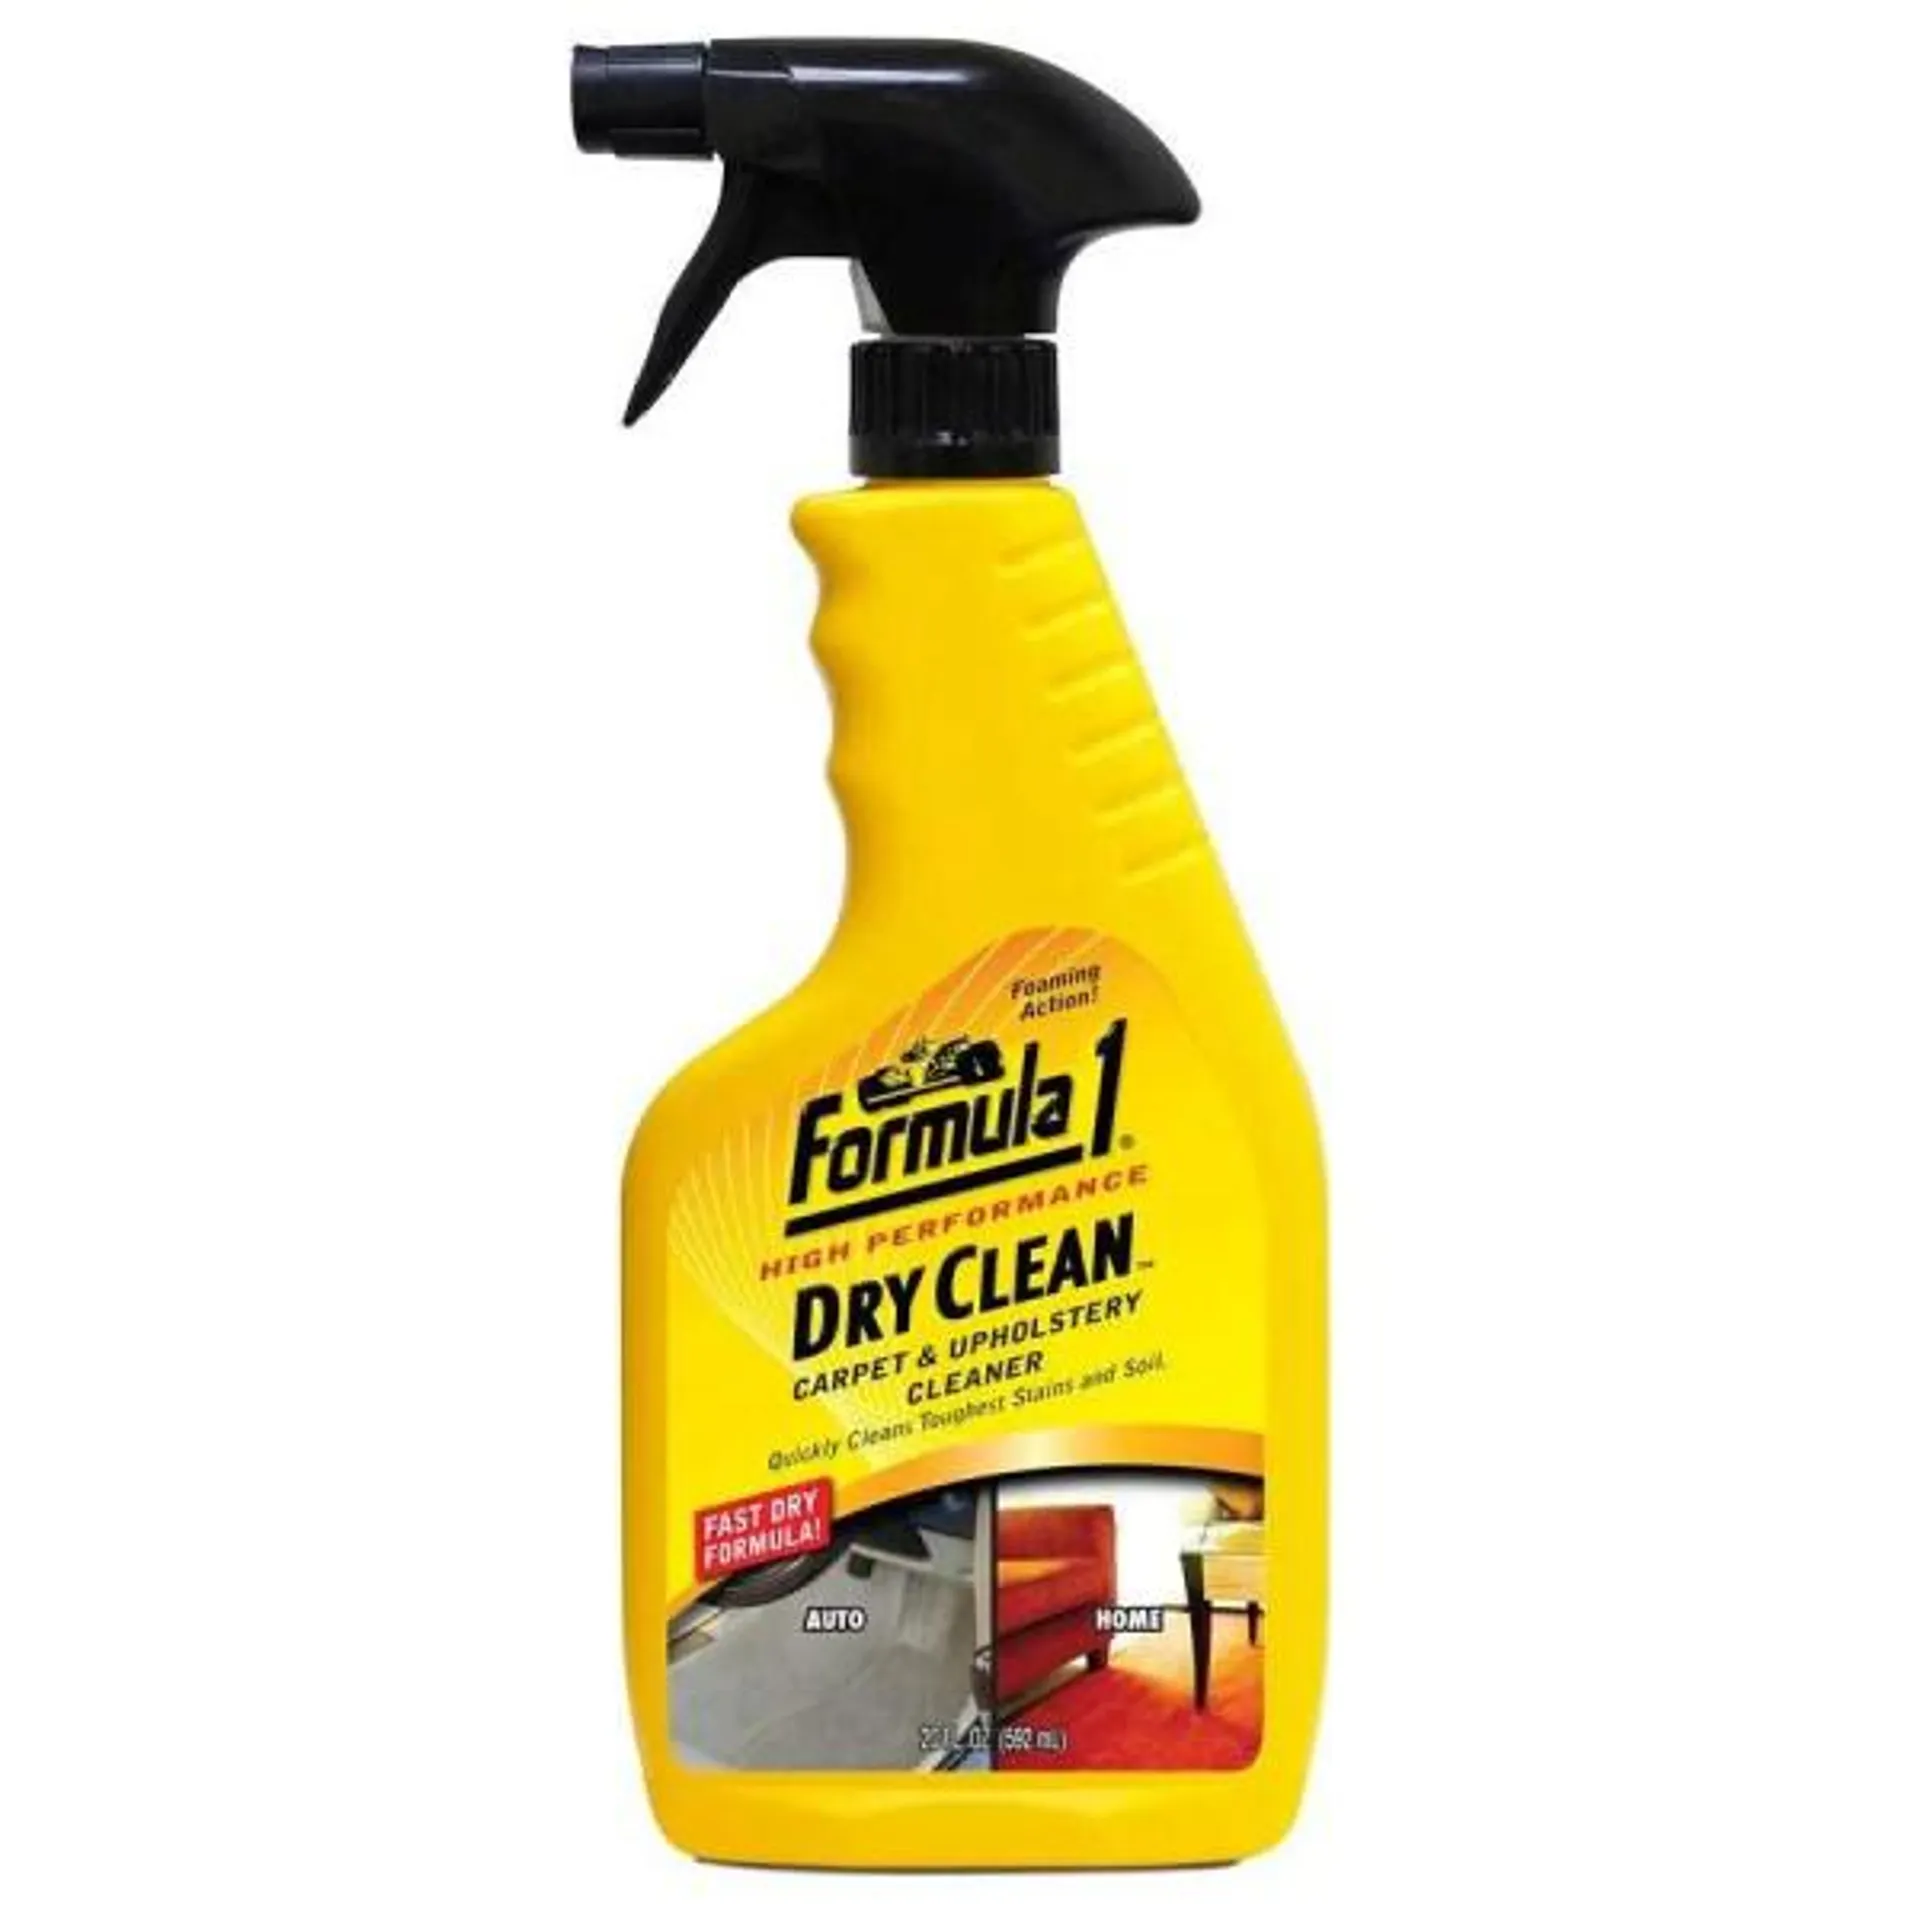 Formula 1 Dry Clean Carpet & Upholstery Cleaner